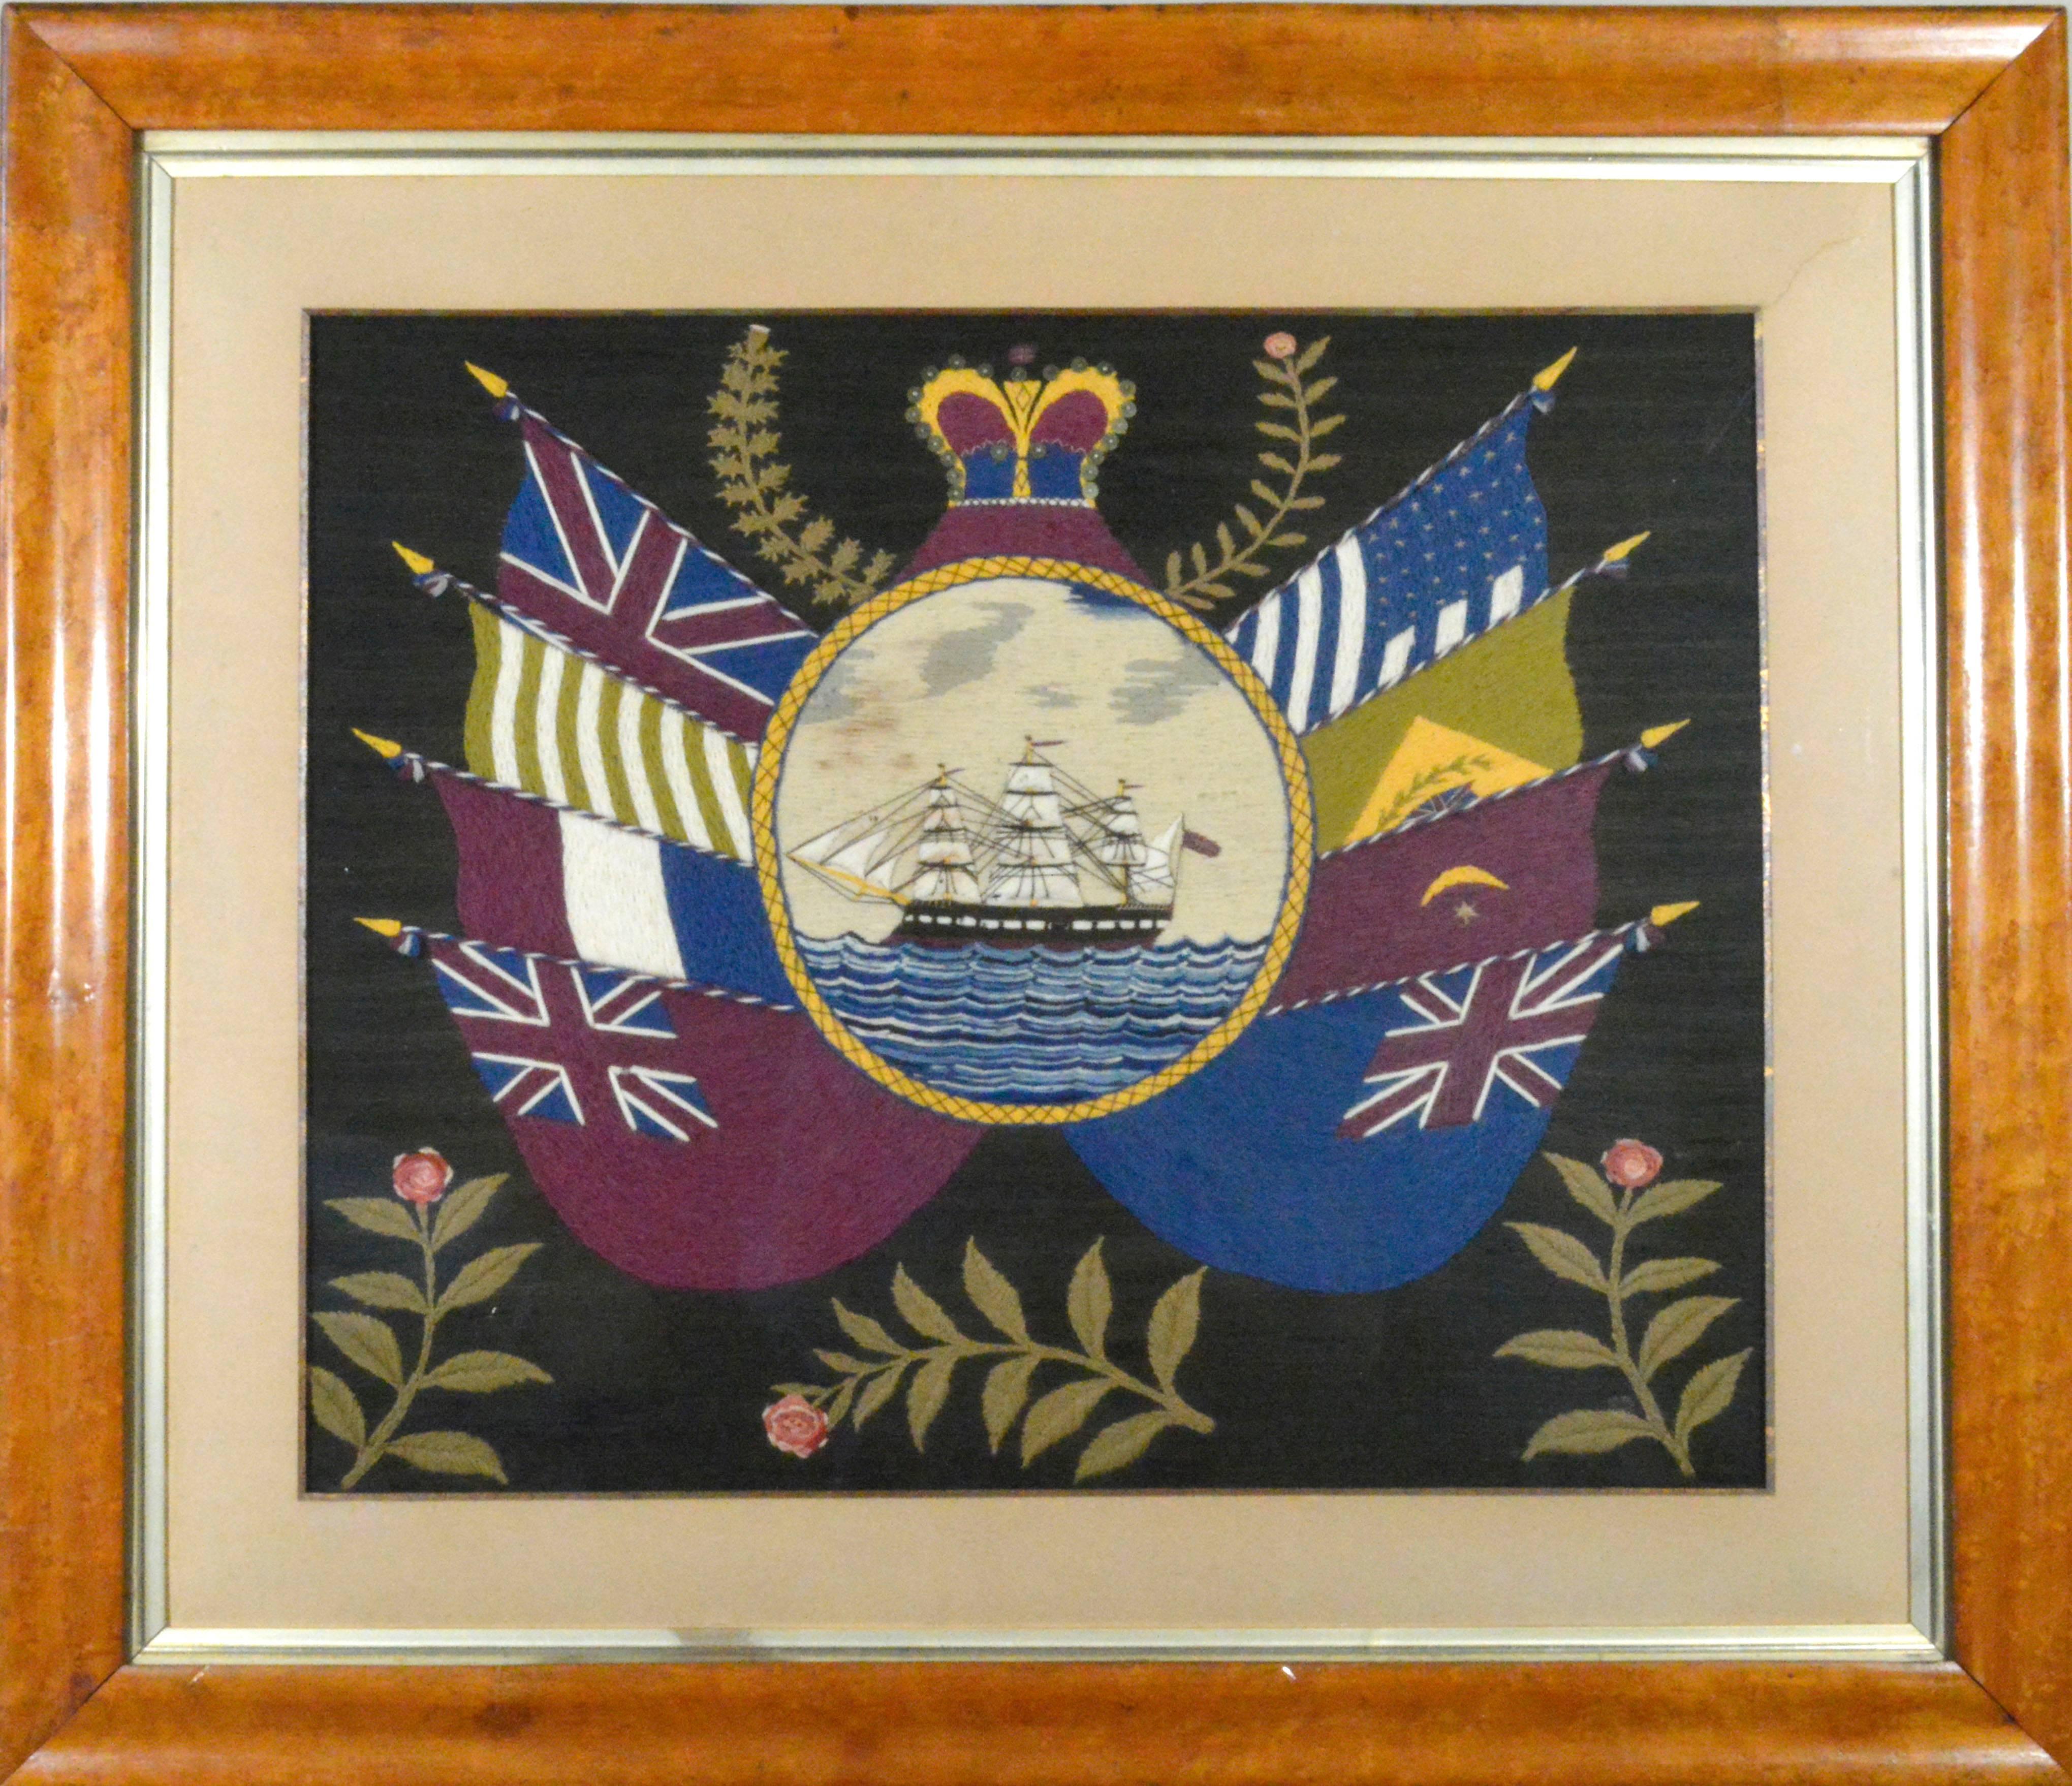 The pair of large Sailor's woolwork pictures are within maple frames and a gilt inner border with a sand colored mat. These are known as woolies.

The pictures are a true pair with all the details reversed with the ships facing towards each other.